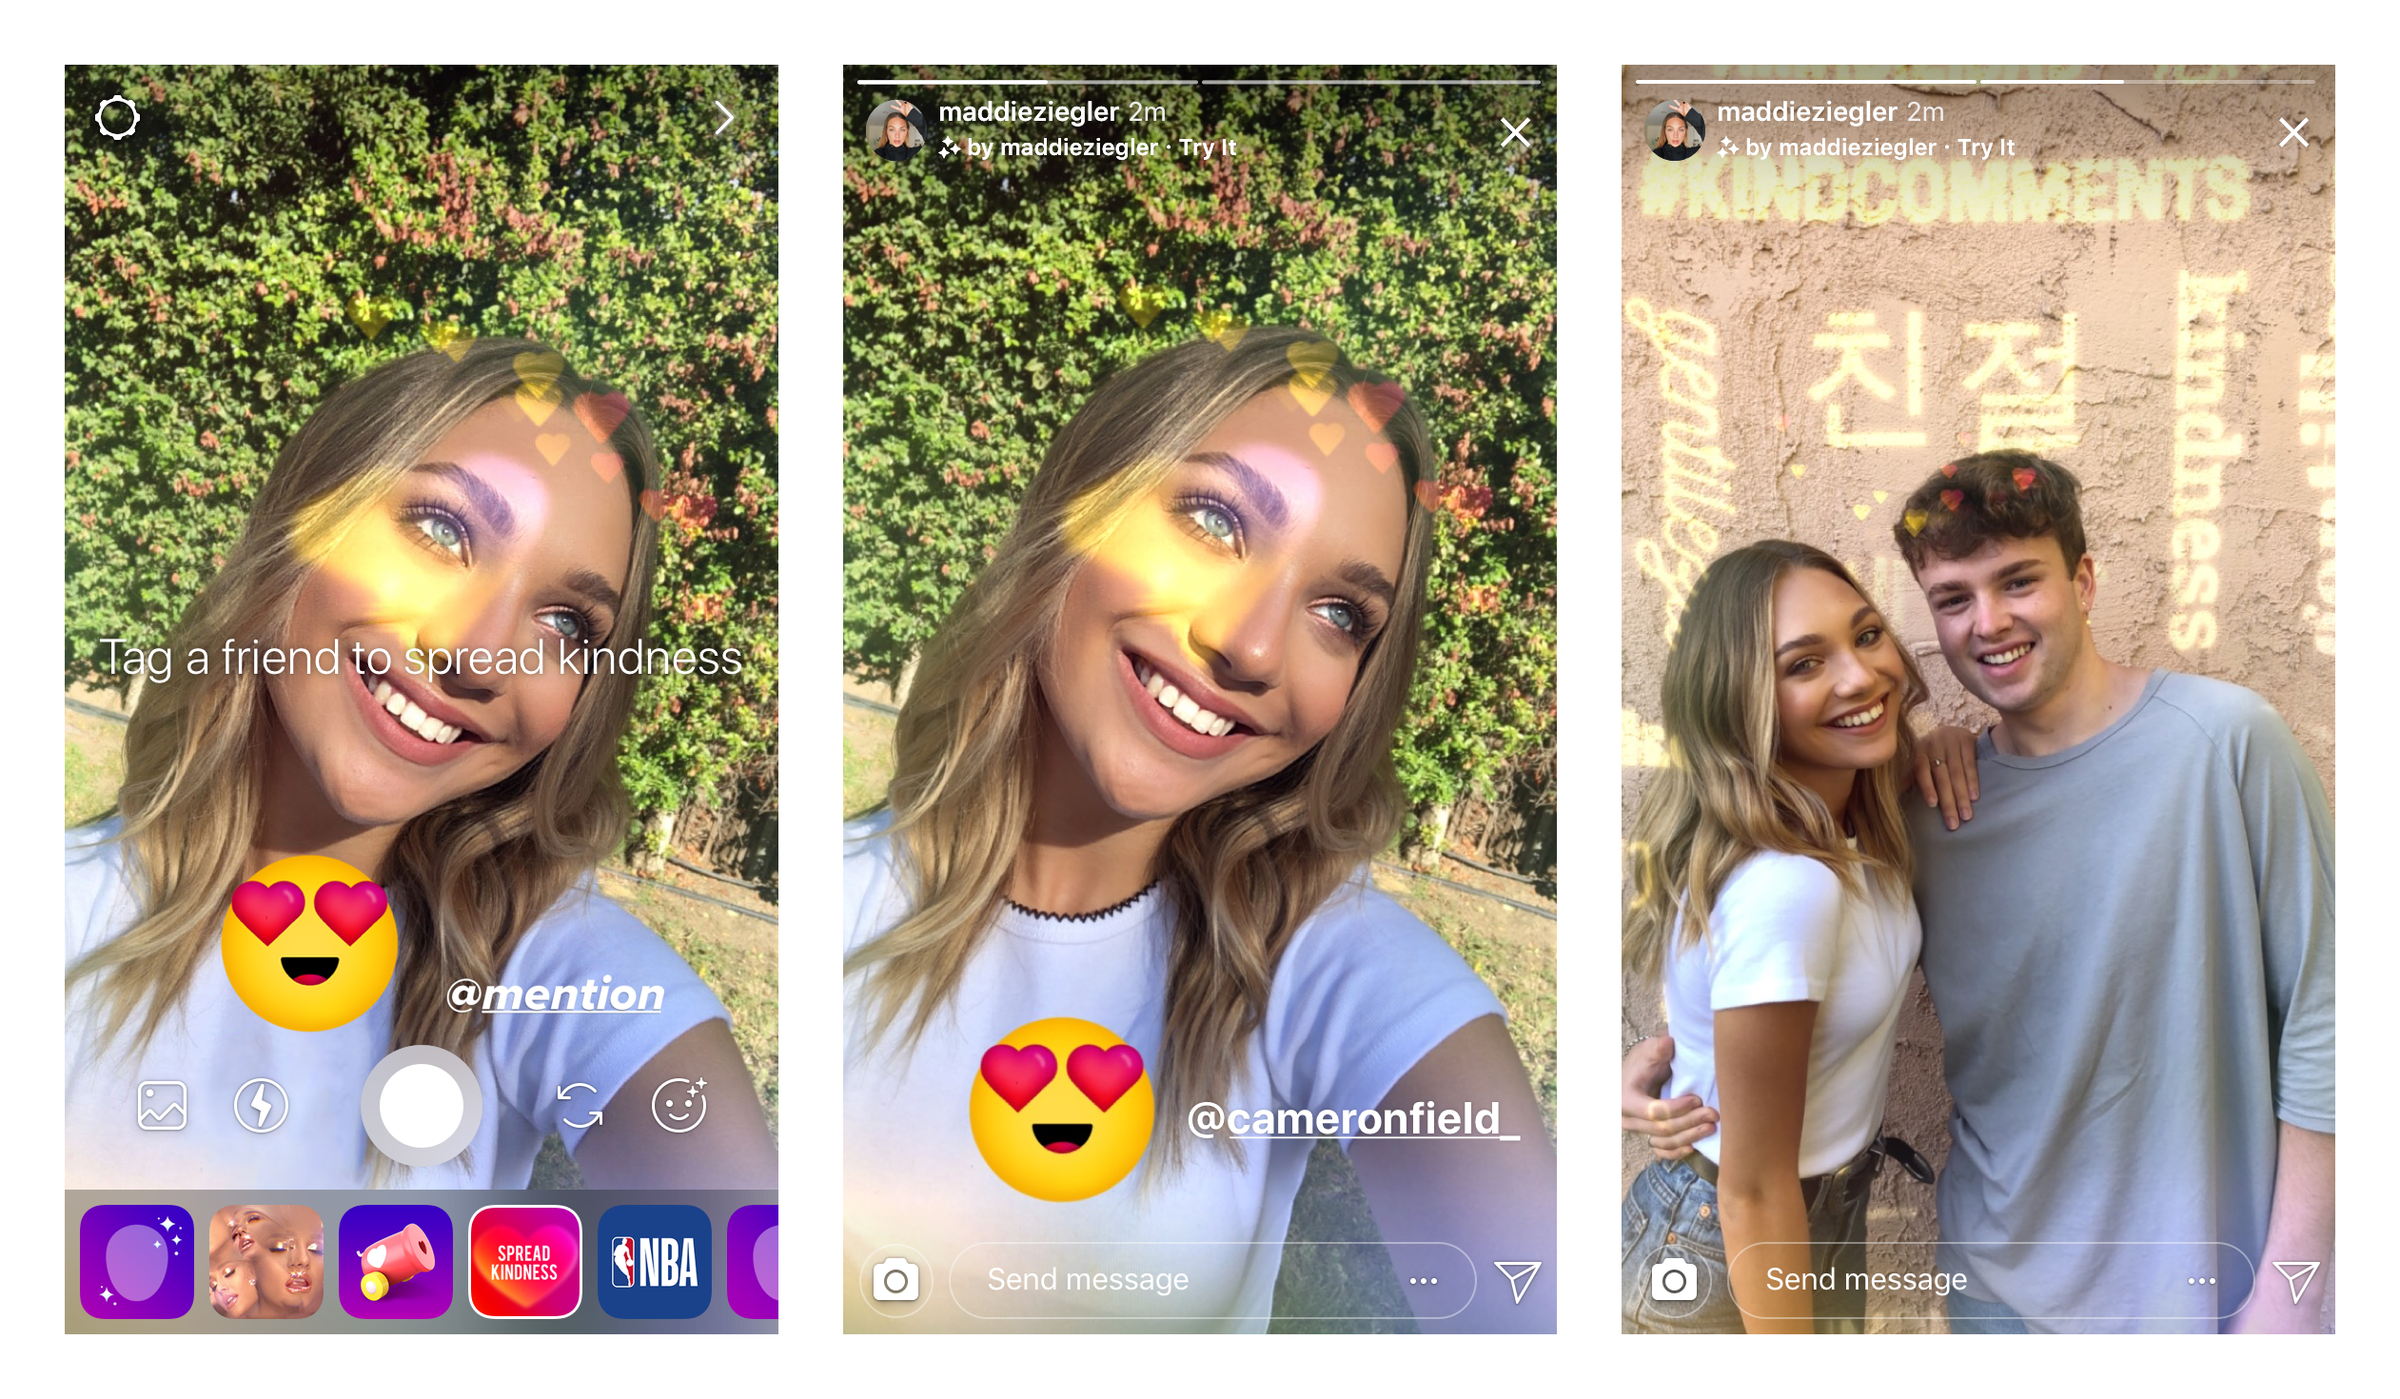 Instagram’s new “kindness camera effect” as launched by teen author, dancer, and actor Maddie Ziegler.